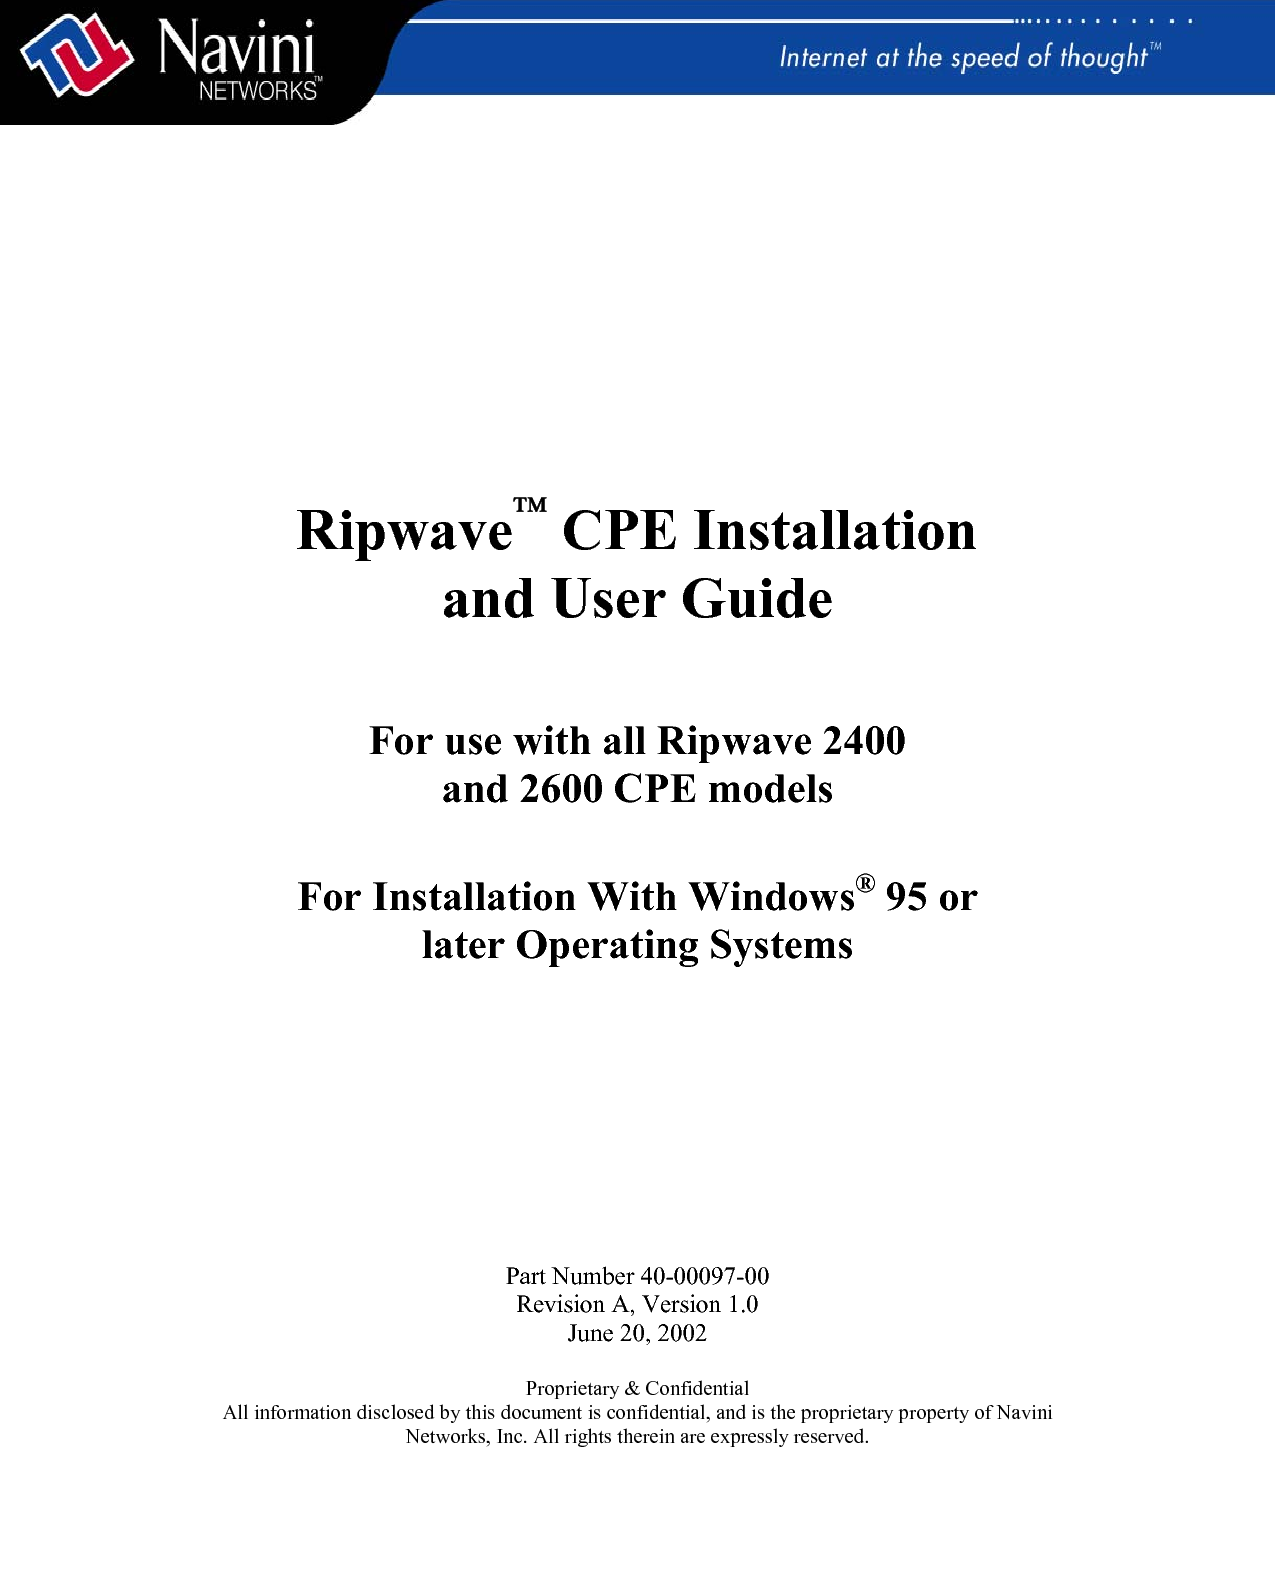 Ripwave Unit Installation and User Guide                                        Navini Networks, Inc.                                                